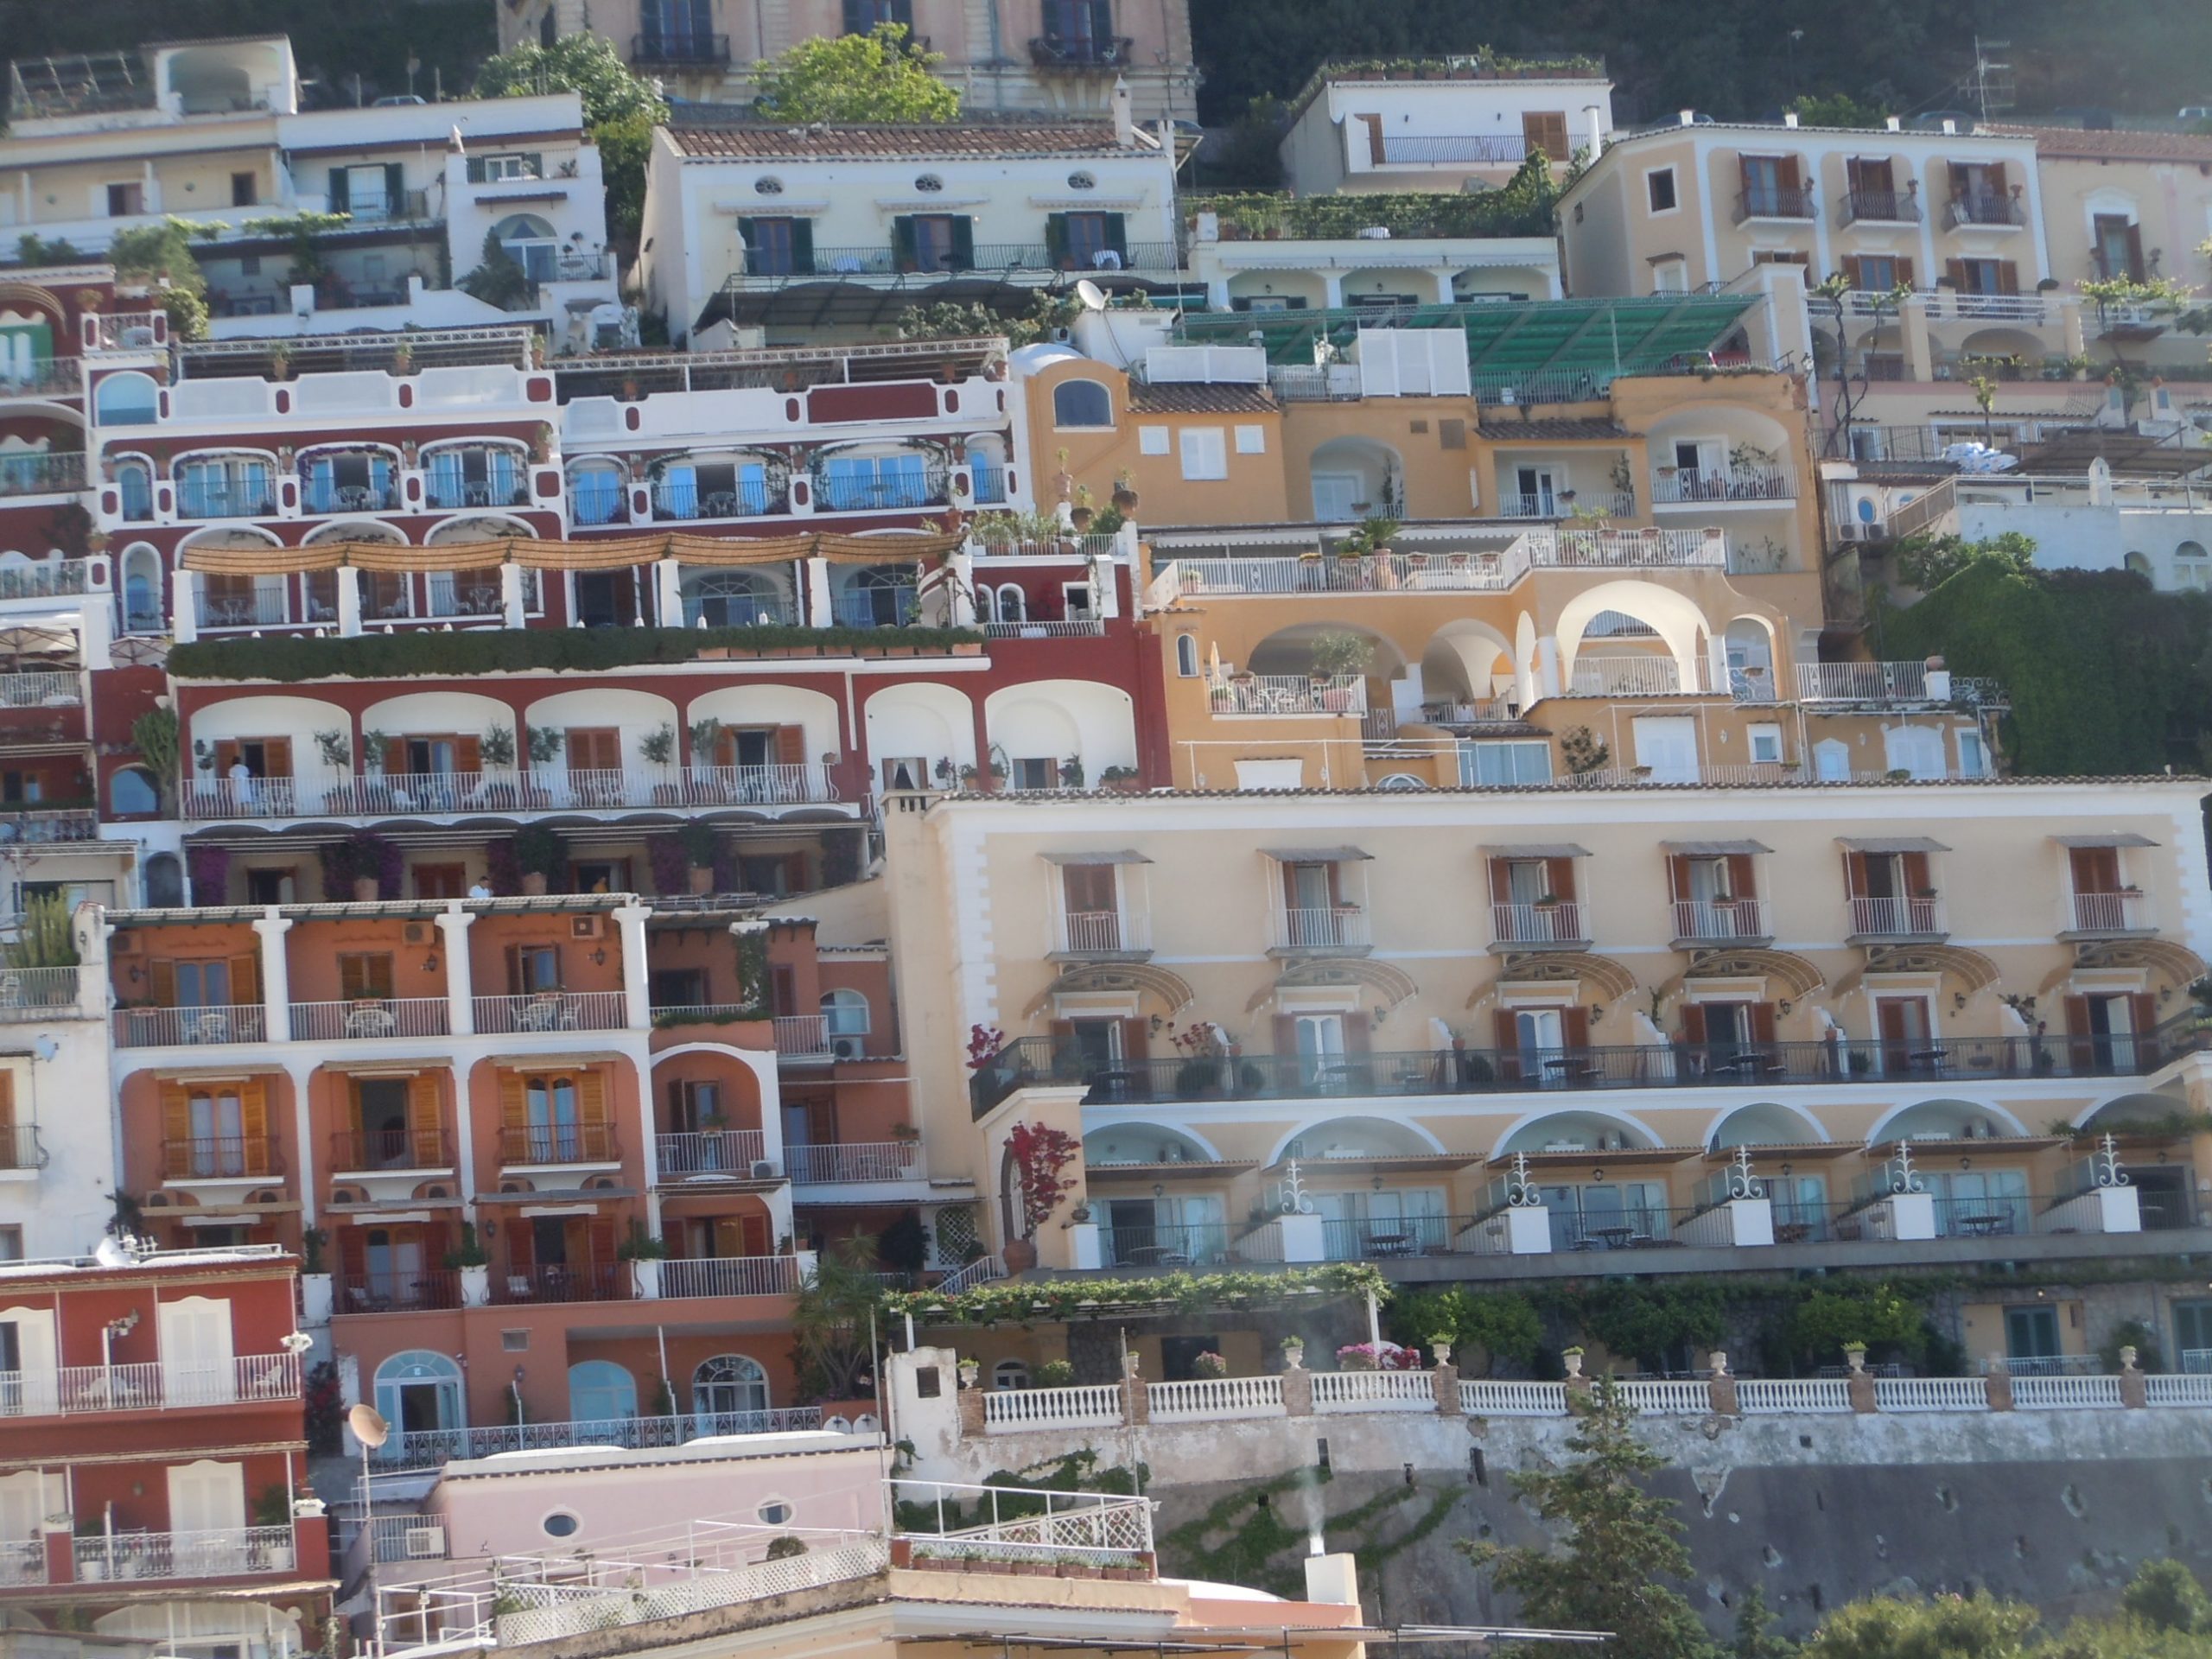 hotels and homes on the cliffs above Positano, Sicily